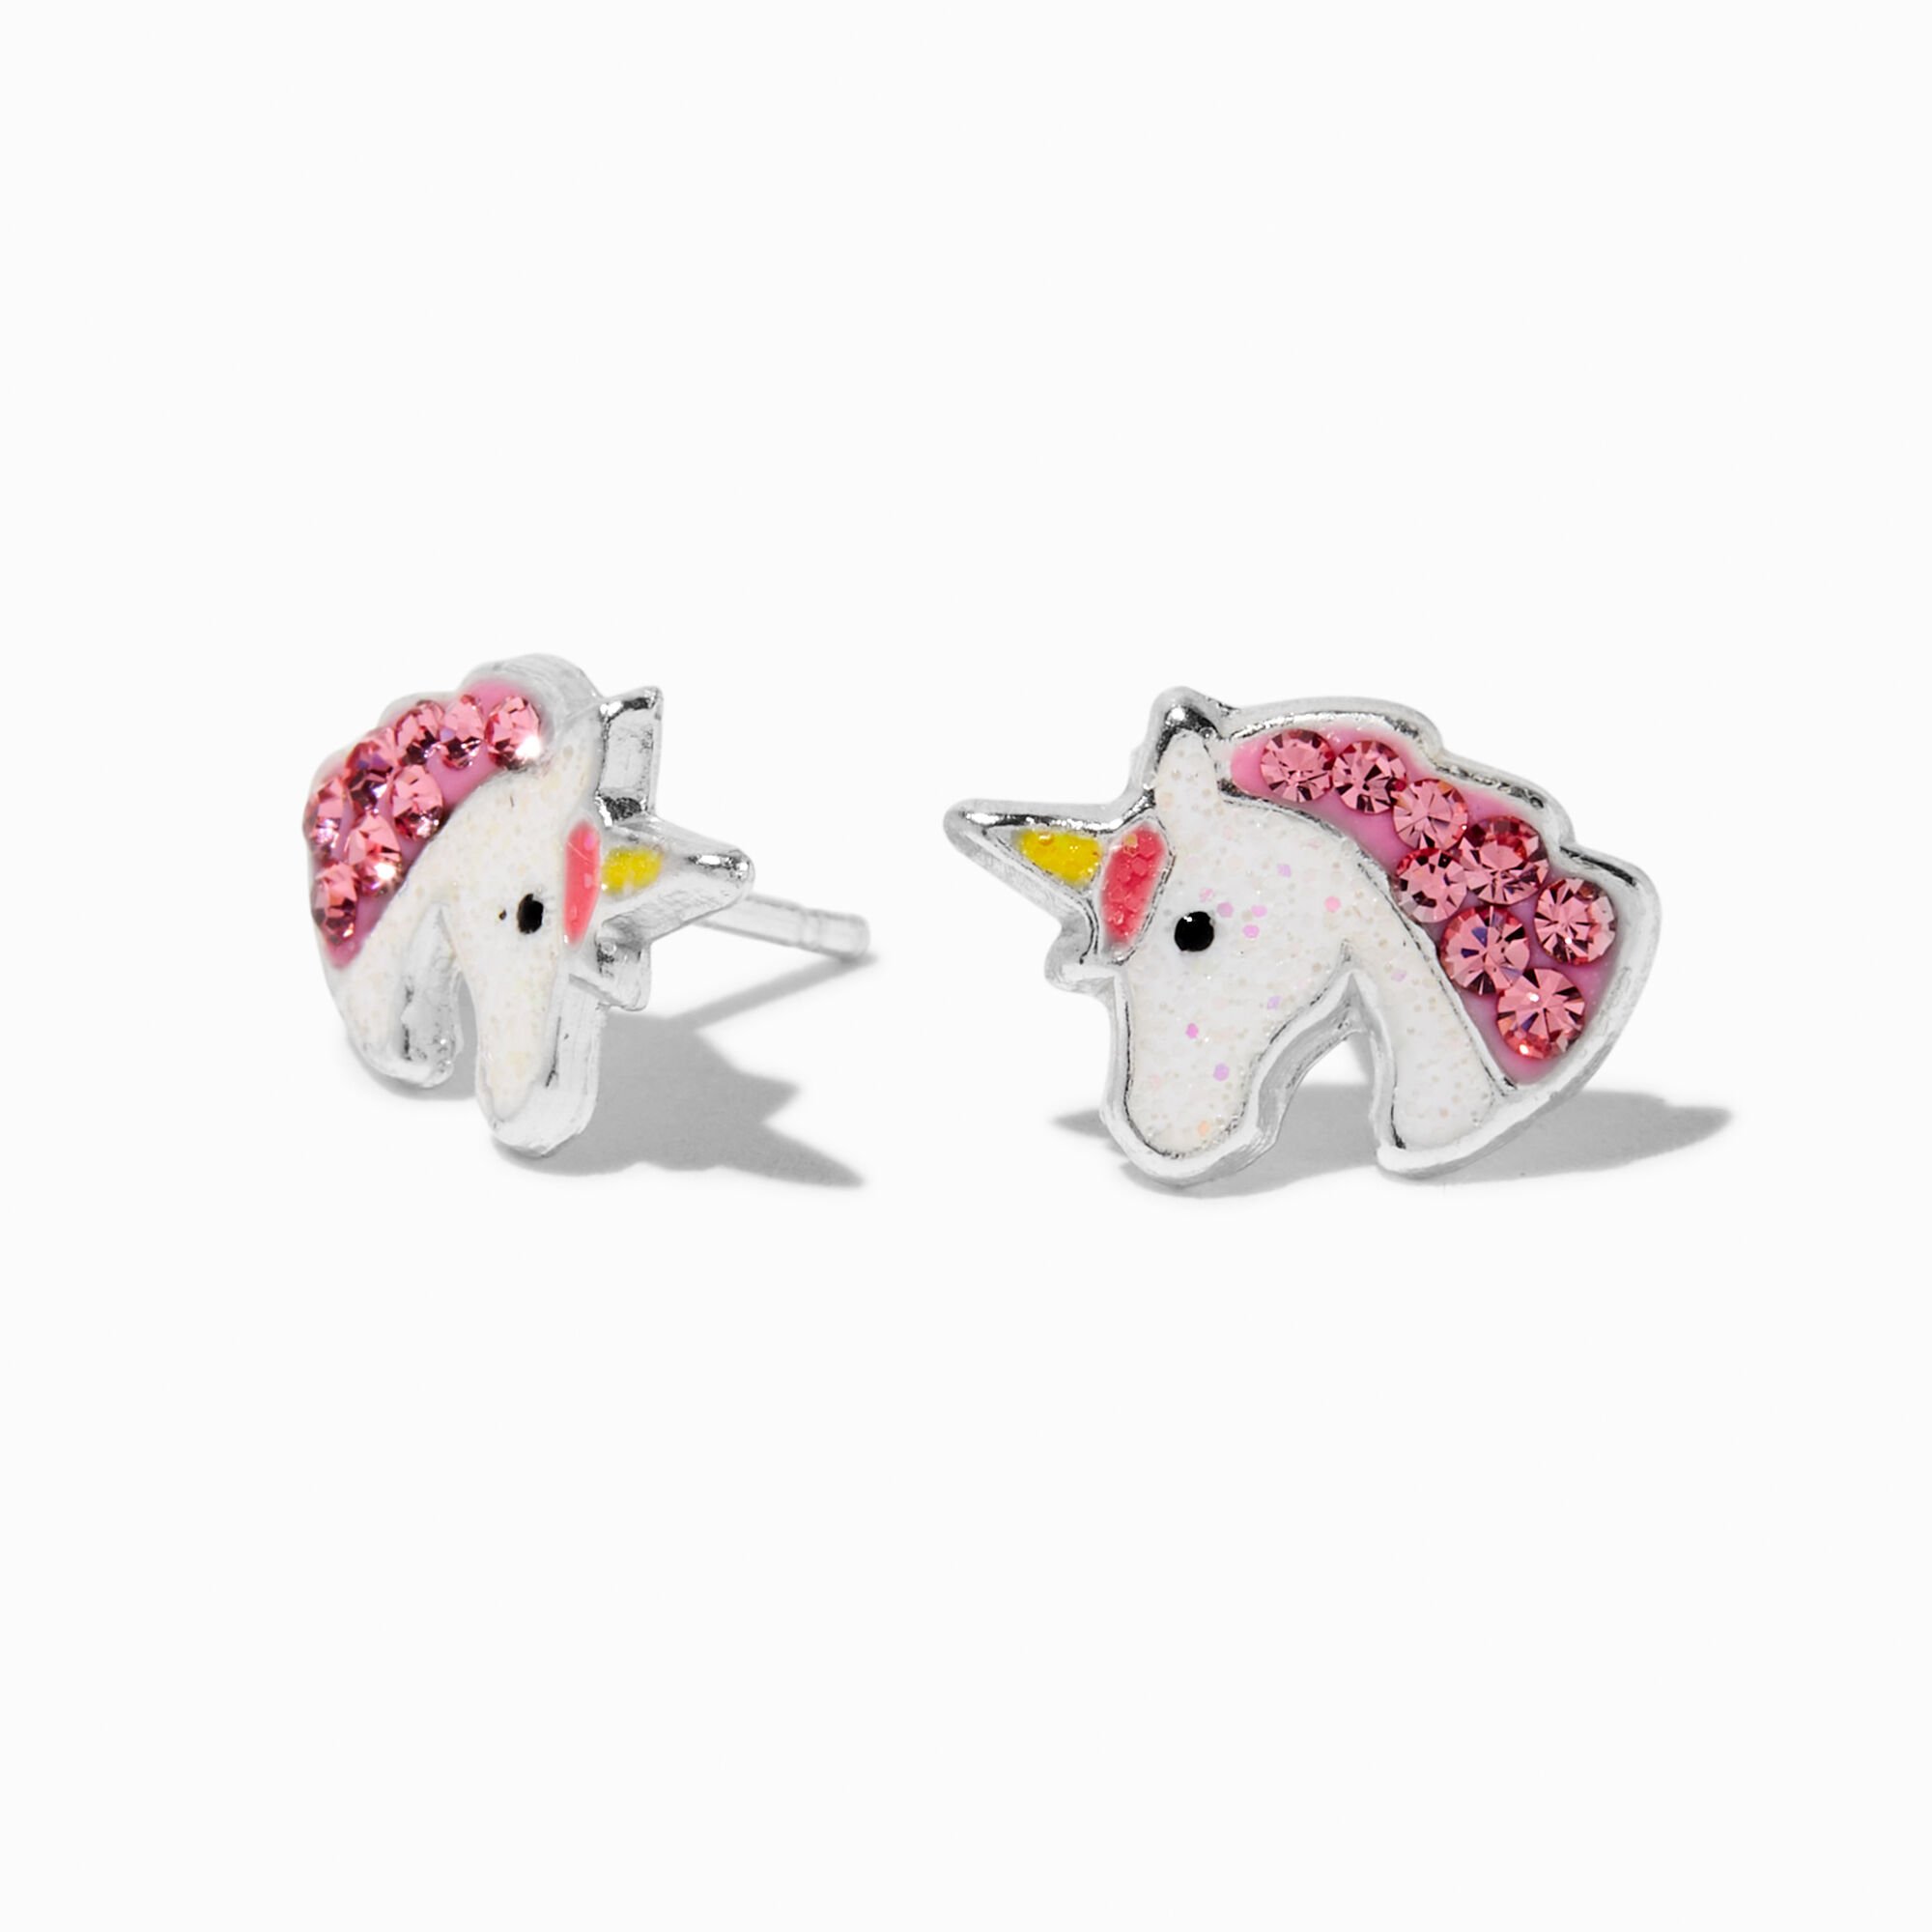 View Claires Crystal Party Unicorn Stud Earrings Silver information